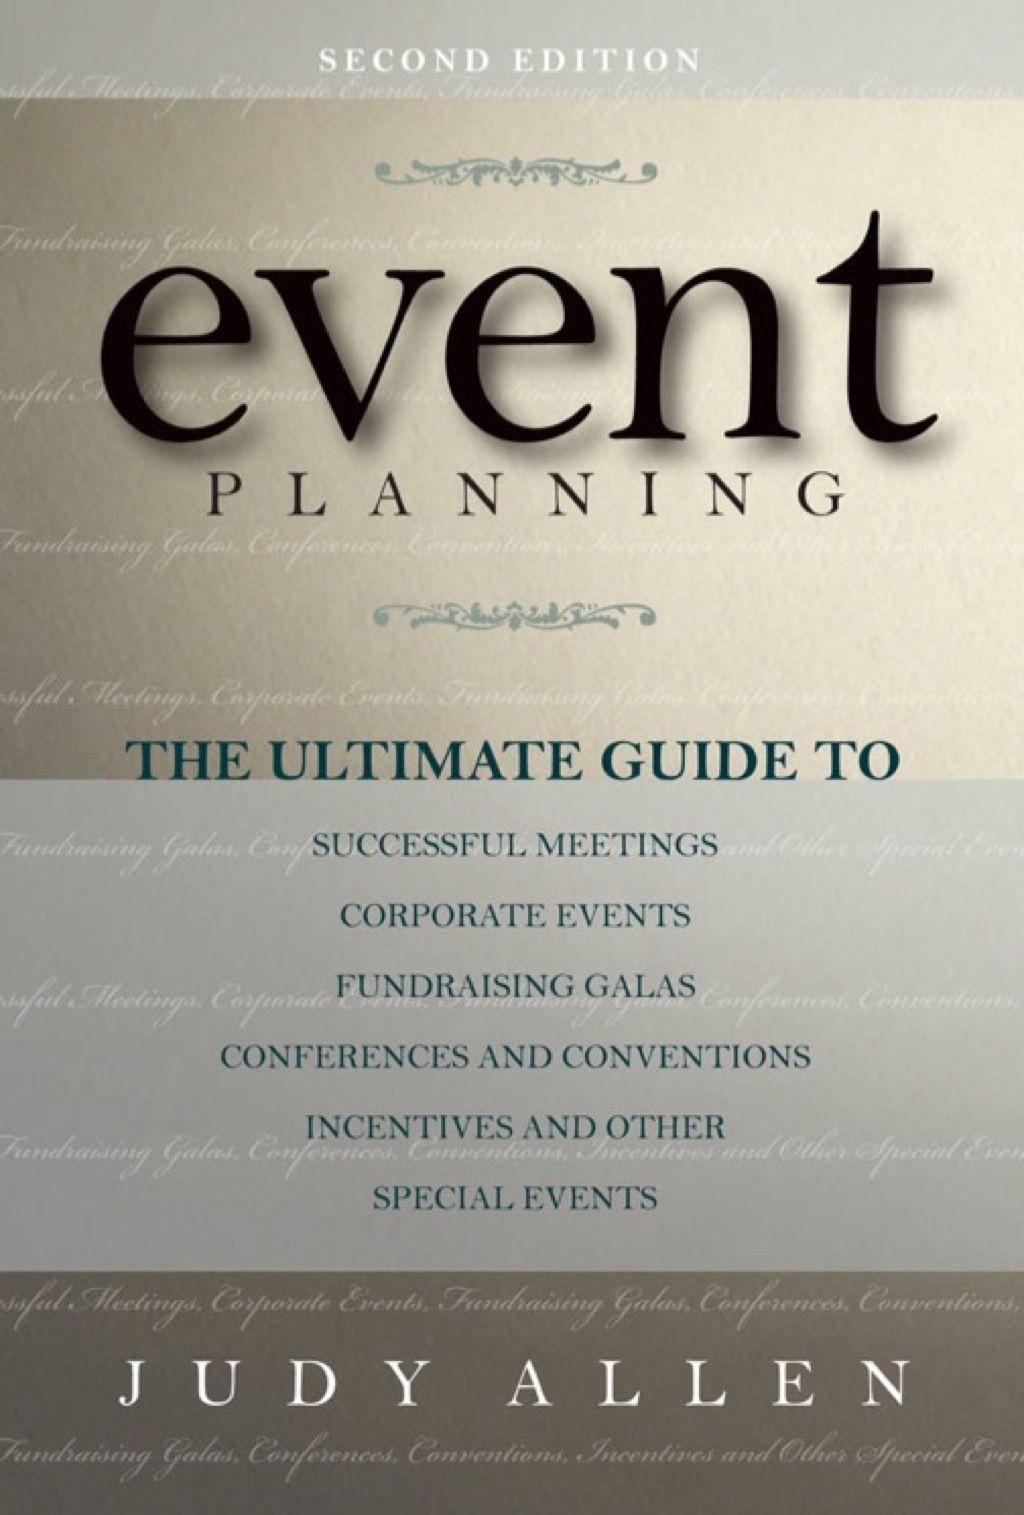 Event Planning: The Ultimate Guide To Successful Meetings  Corporate Events  Fundraising Galas  Conferences  Conventions  (eBook Rental) -   13 Event Planning Office people ideas